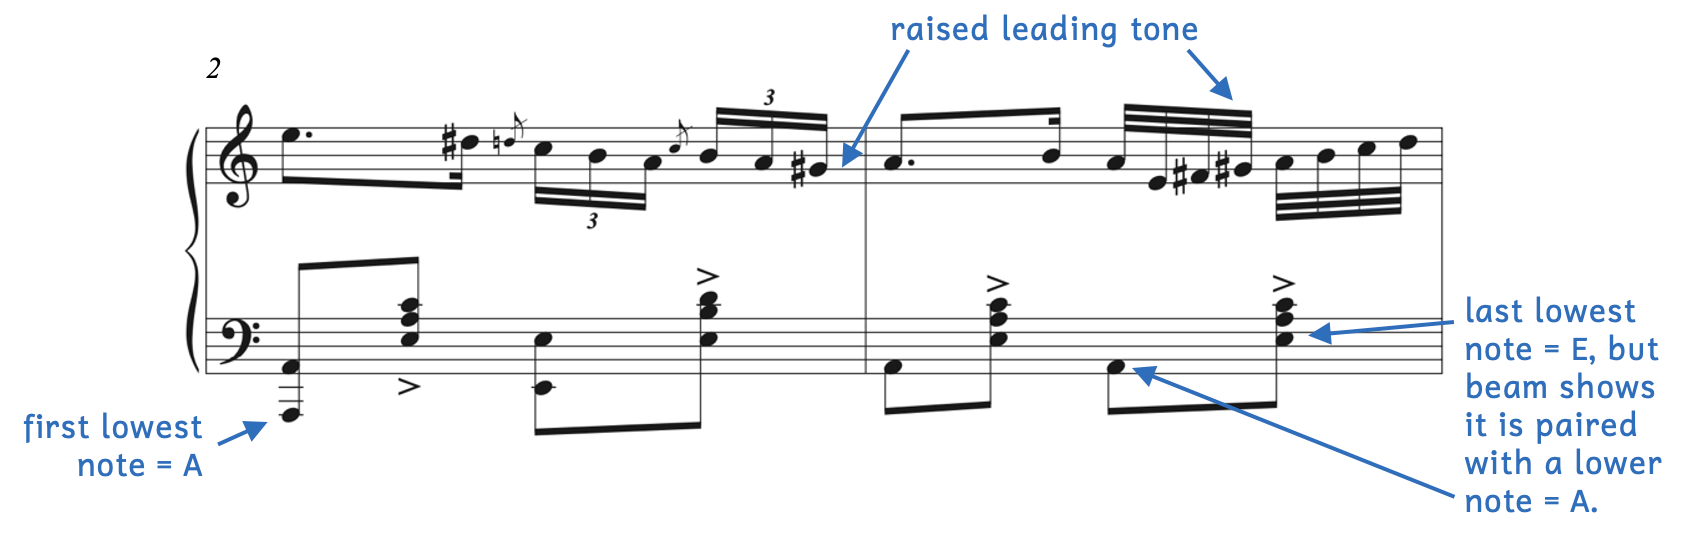 The Theme from Blahetka's Variations brillantes sur un thême hongrois, Op. 18. The first lowest note is A. The last lowest note is E but it is paired with A, which is lower. The raised leading tone is G-sharp.